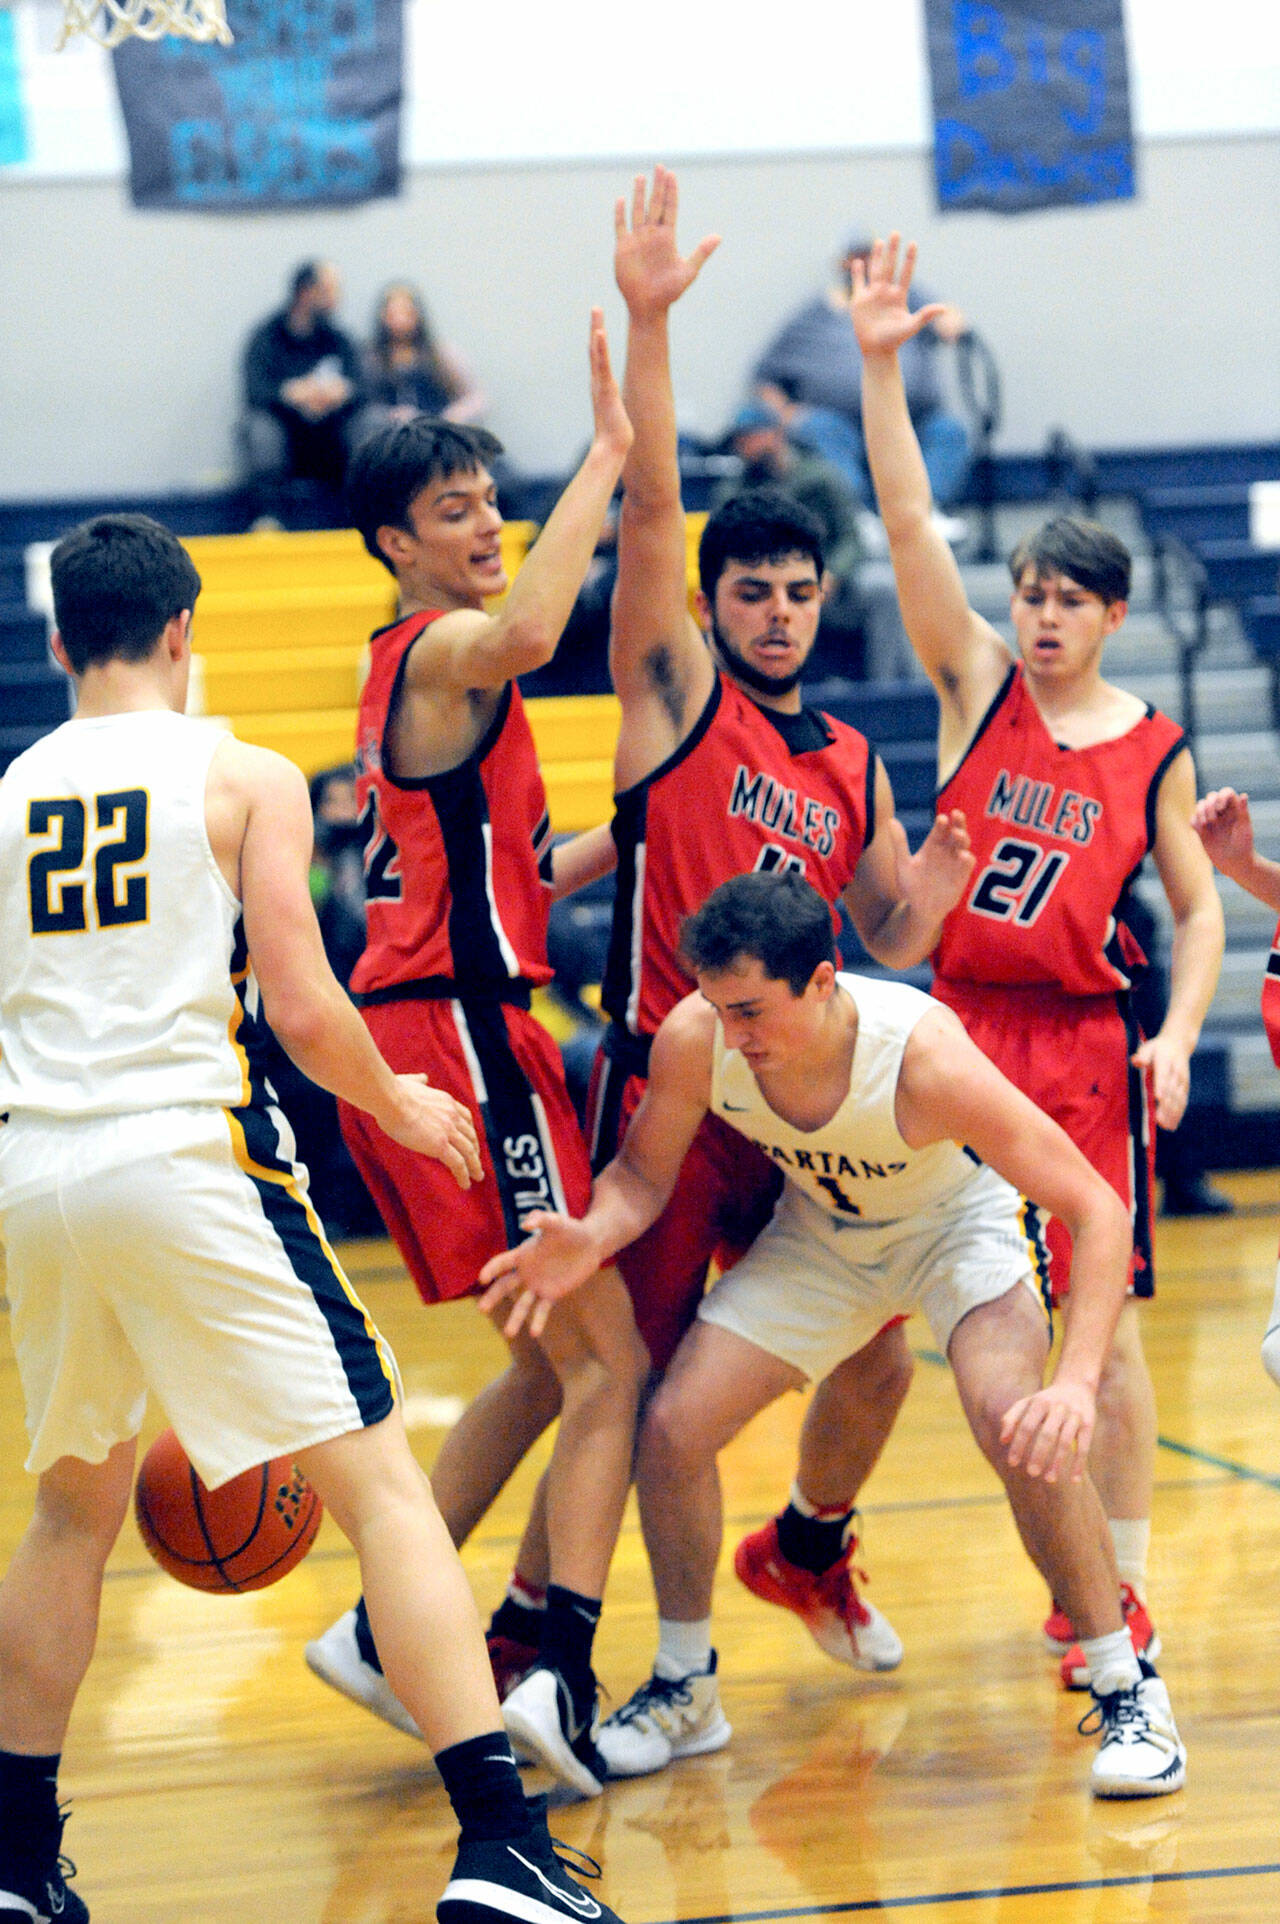 Forks’ Riley Pursley (1) eyes the ball beneath the Wahkiakum defense from left Titan Niemela, Dominic Curl, and Tanner Collupy. Looking on is Spartan Brody Lausche (22). Photo by Lonnie Archibald.